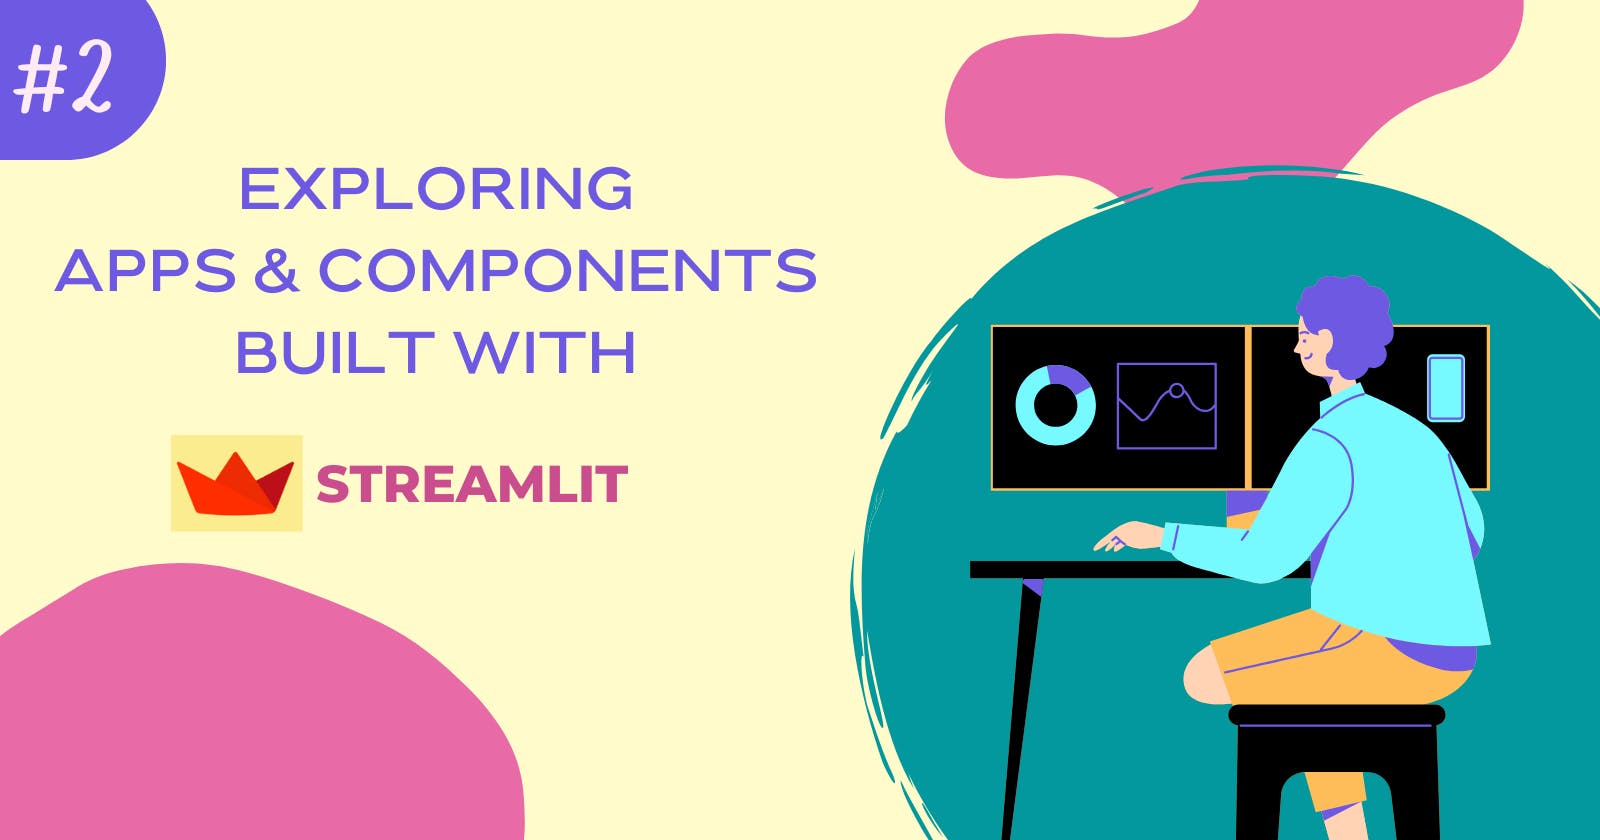 Super Awesome Streamlit Apps & Components 🎈